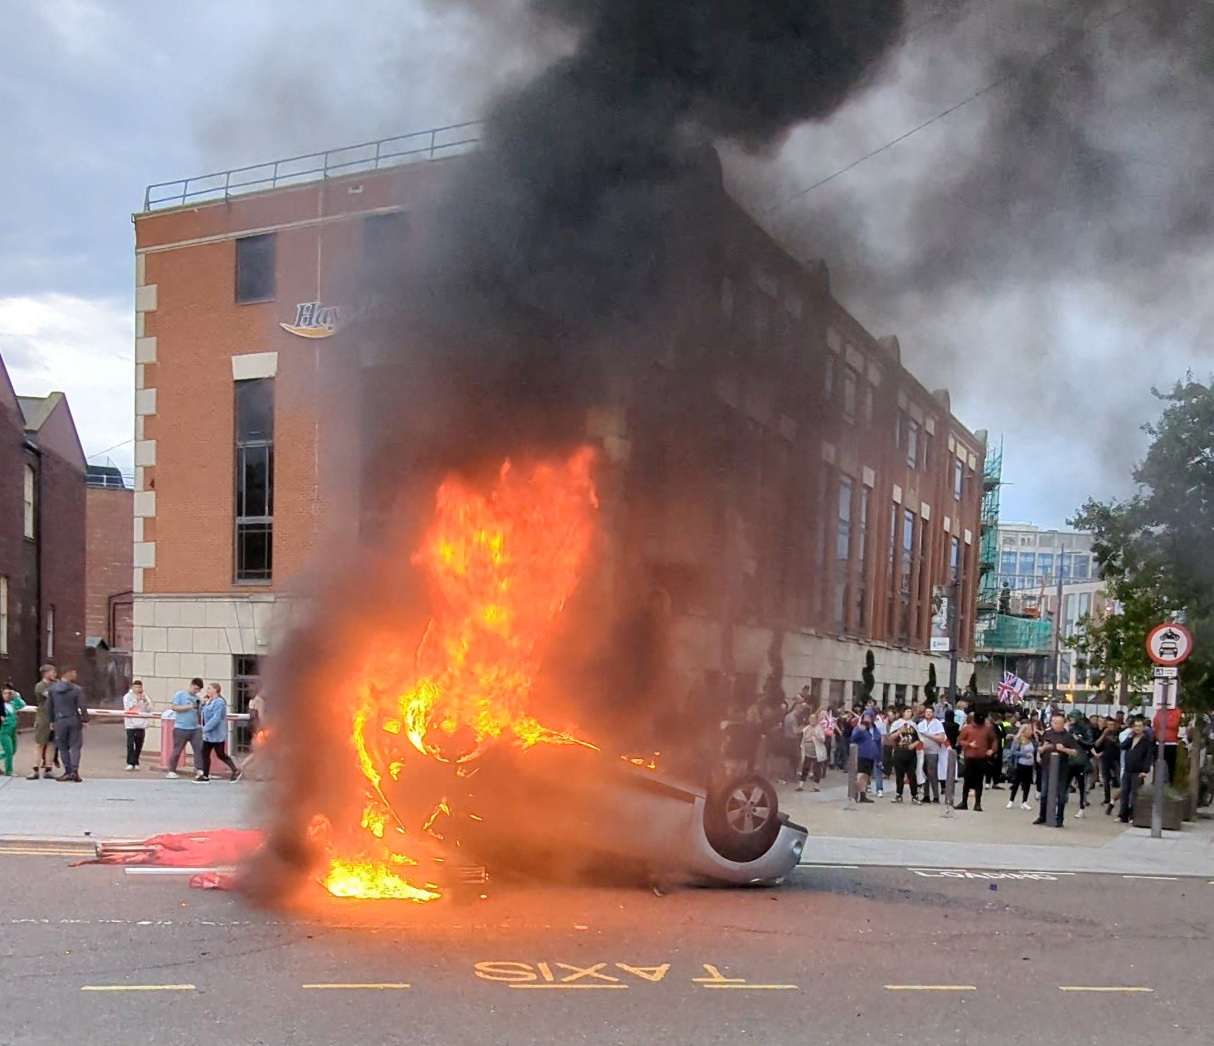 UK examines foreign states’ role in sowing discord leading to riots